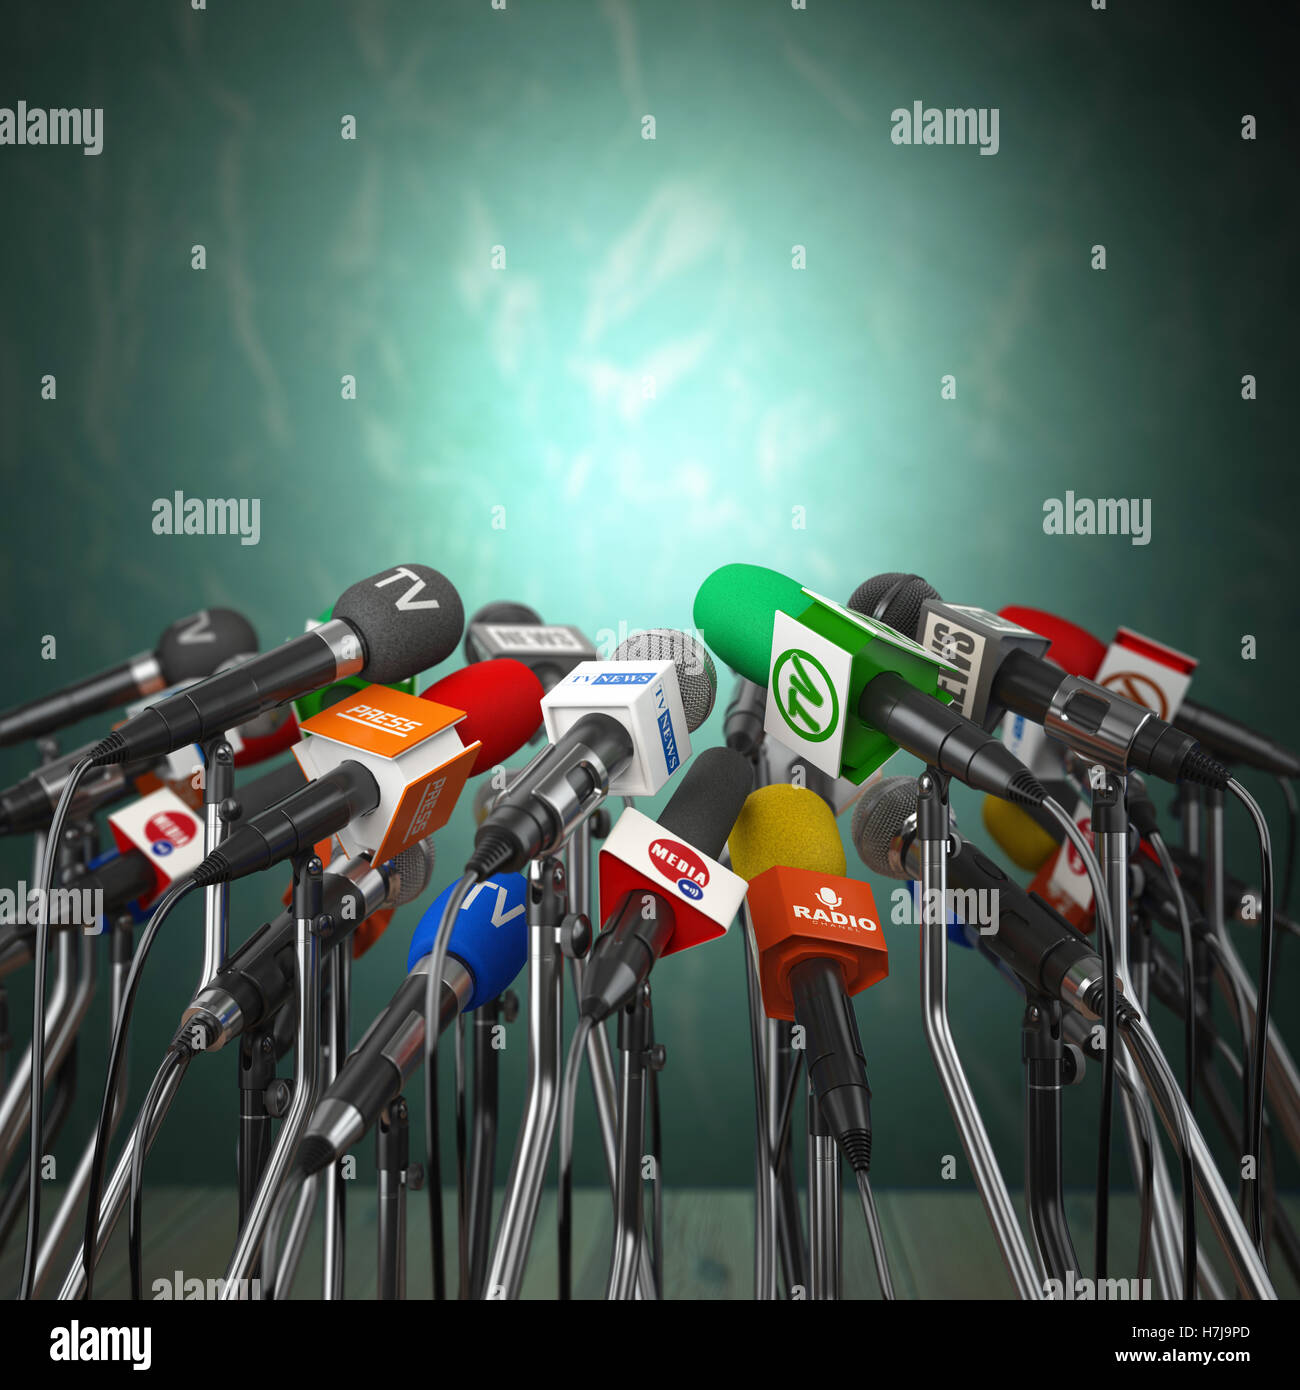 Microphones prepared for press conference or interview on green background.  3d illustration Stock Photo - Alamy